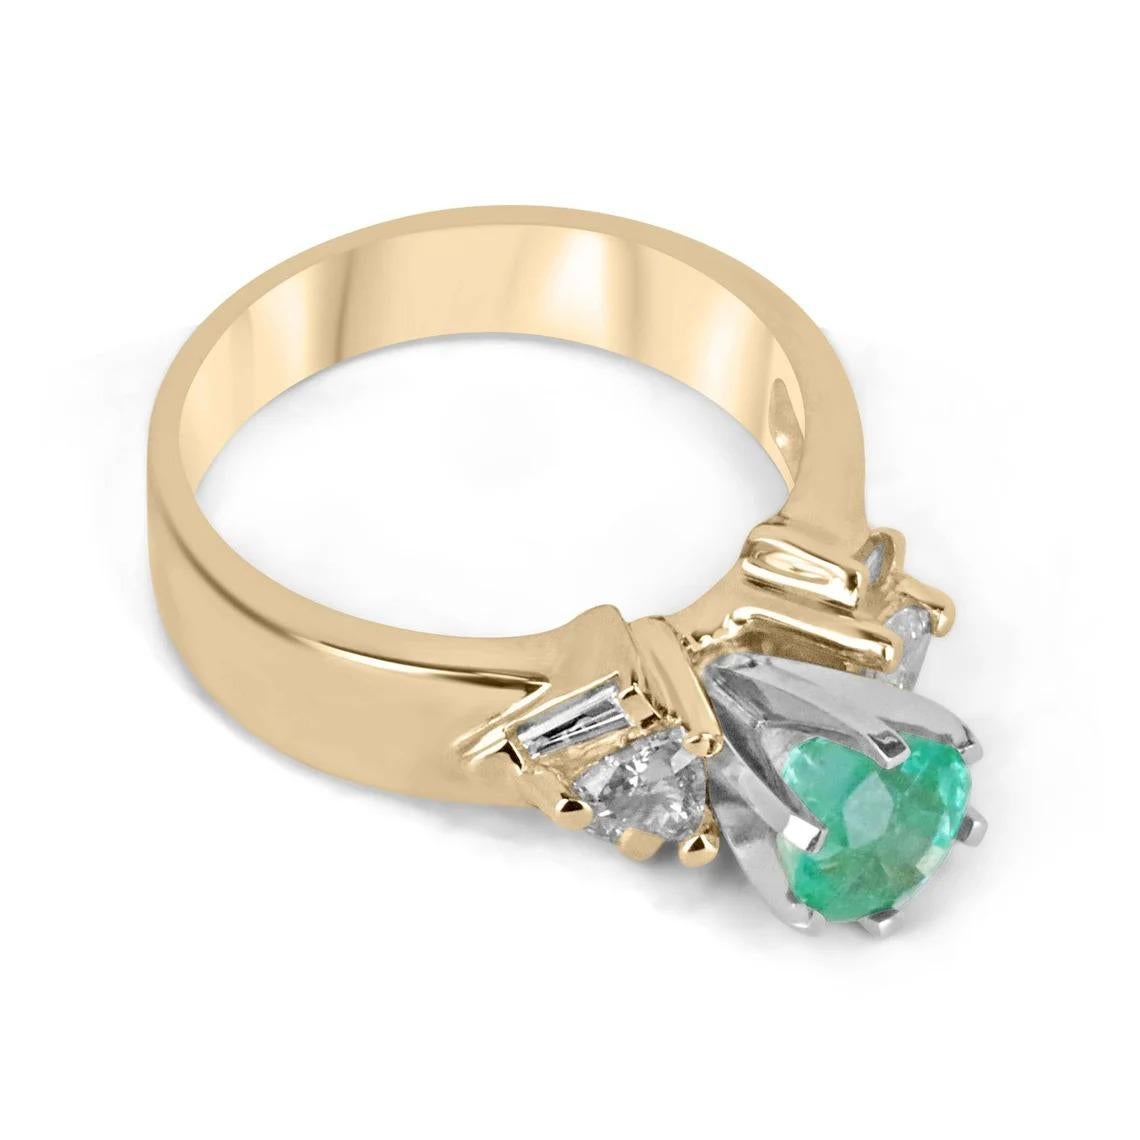 Celebrate your eternal love with this exquisite emerald and diamond engagement ring. The centerpiece of this stunning piece is a mesmerizing 1.15-carat round cut natural emerald, boasting amazing clarity, luster, and a vivid spring green color that